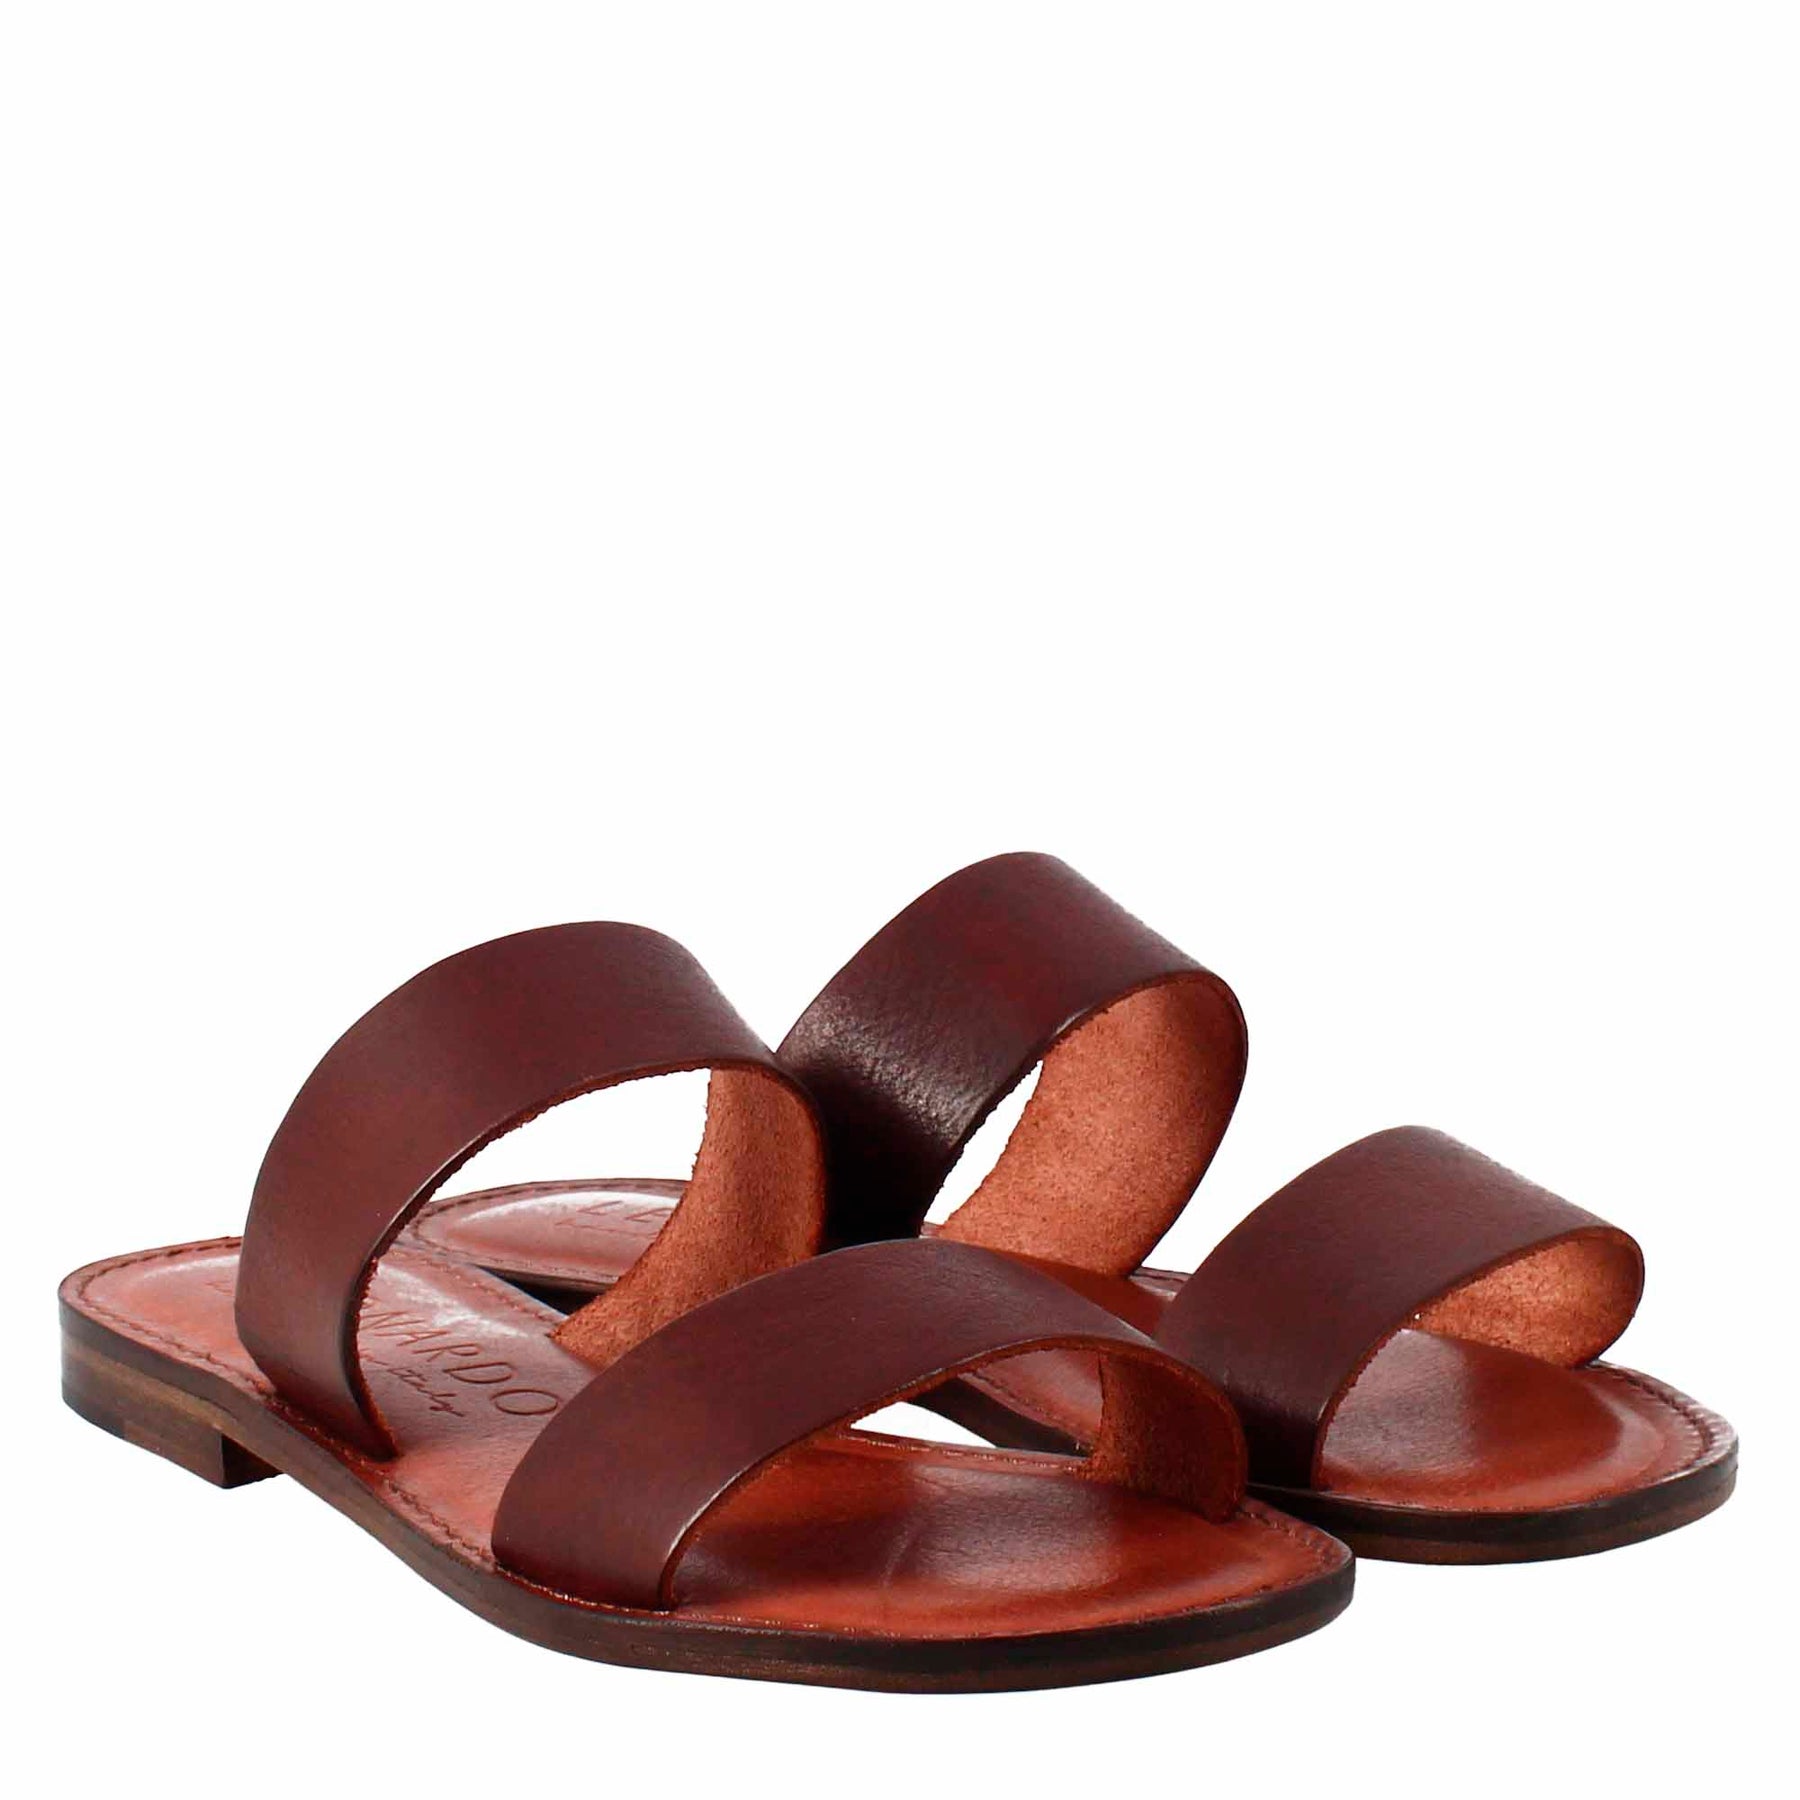 Ancient Roman style Nirvana women's sandals in brown leather 